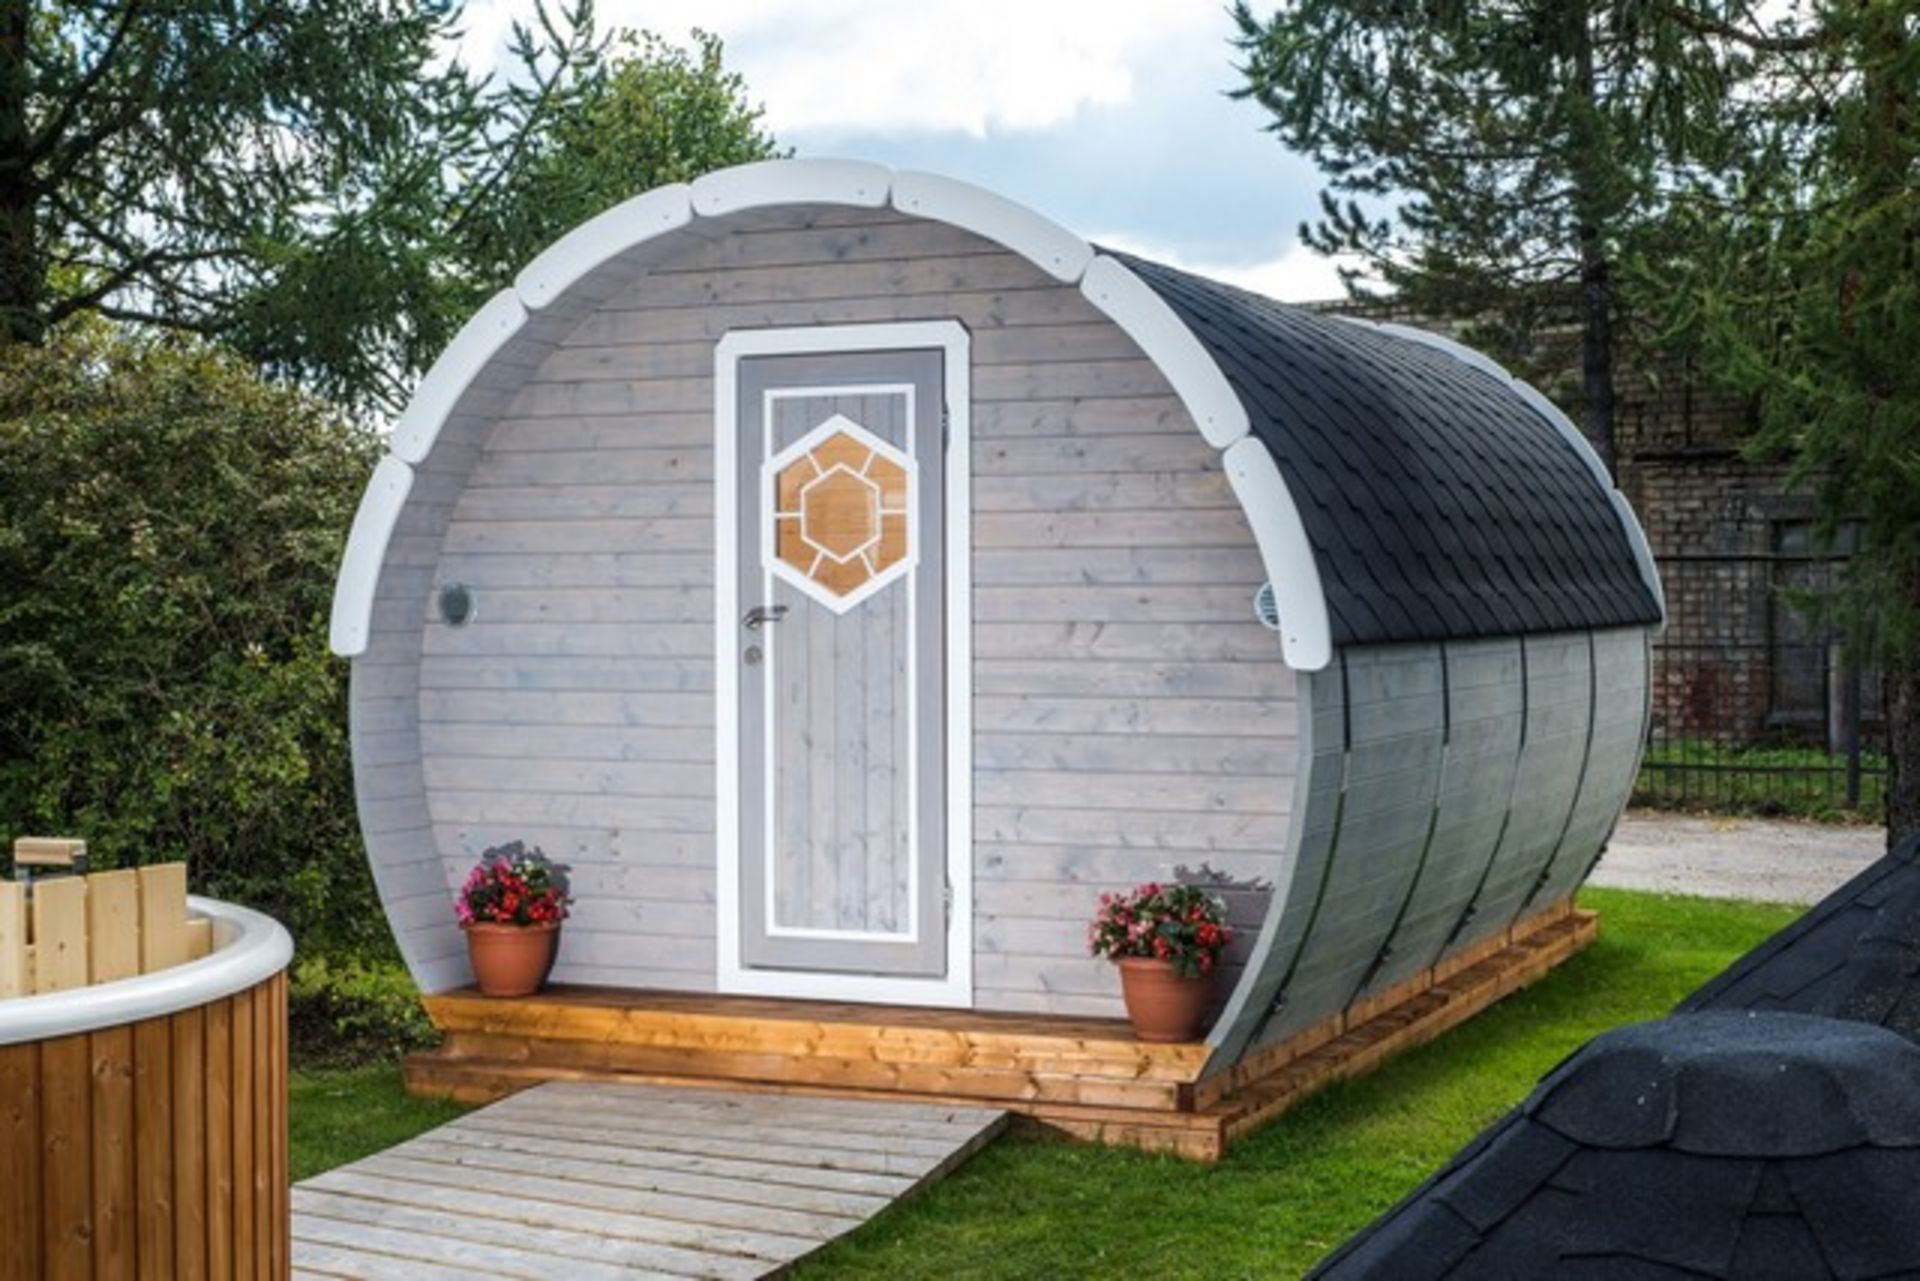 + VAT Brand New 9.5M sq Ice-Viking Barrel- Two Rooms (2x2.3m Sleeping Room and Entrance room with - Image 2 of 6